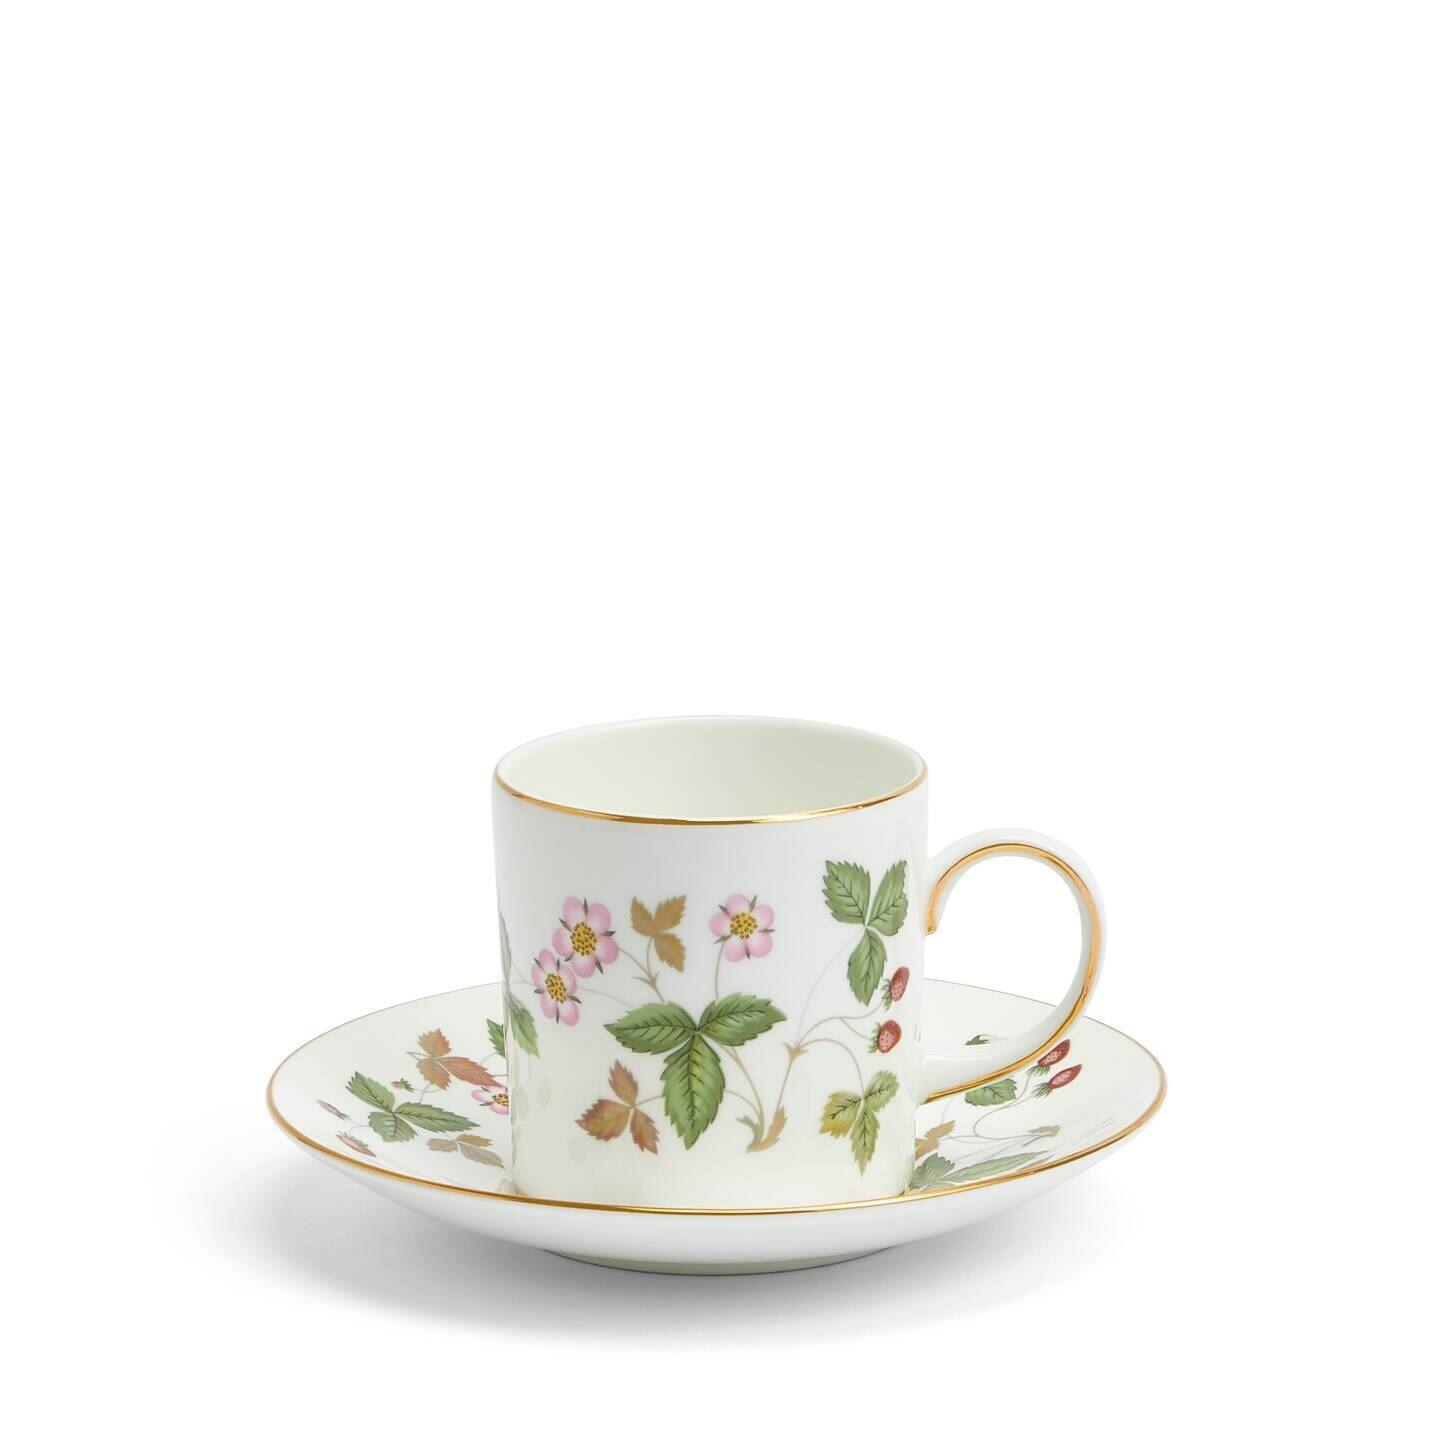 Wedgwood Wild Strawberry Coffee Cup & Saucer